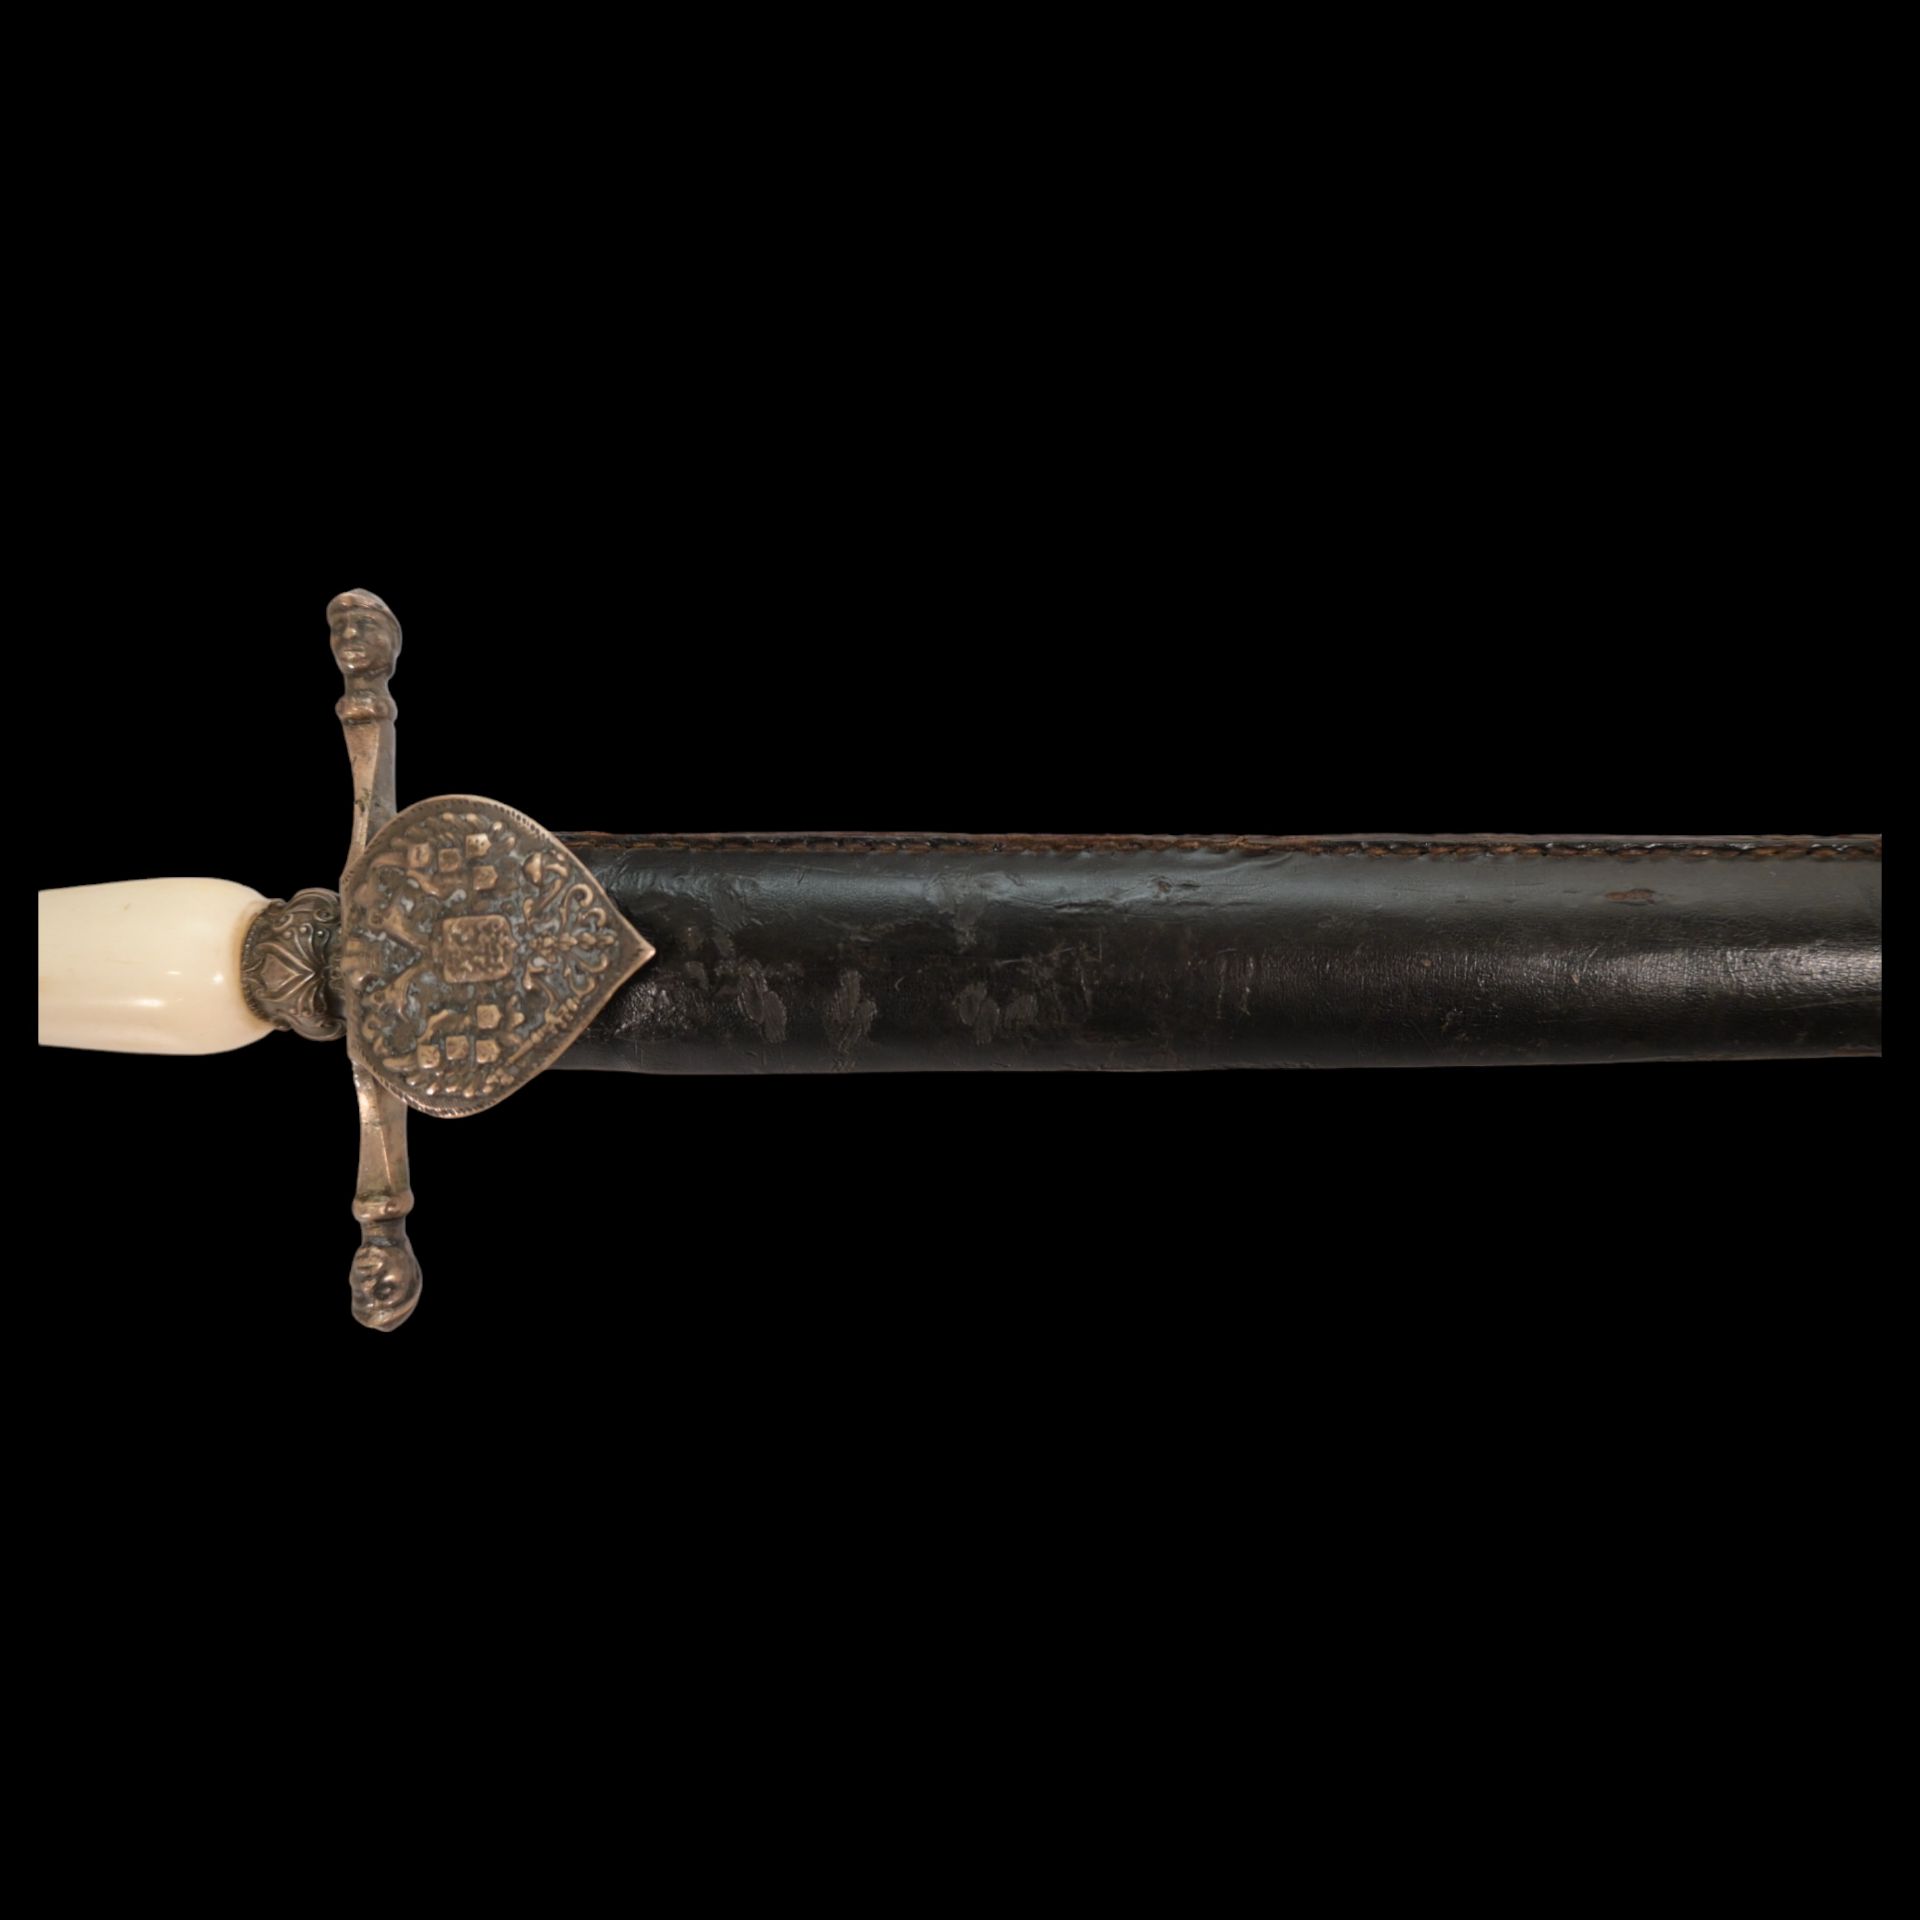 A Hunting bayonet with silver fittings, Russian Empire, second half of the 19th century. - Image 5 of 30